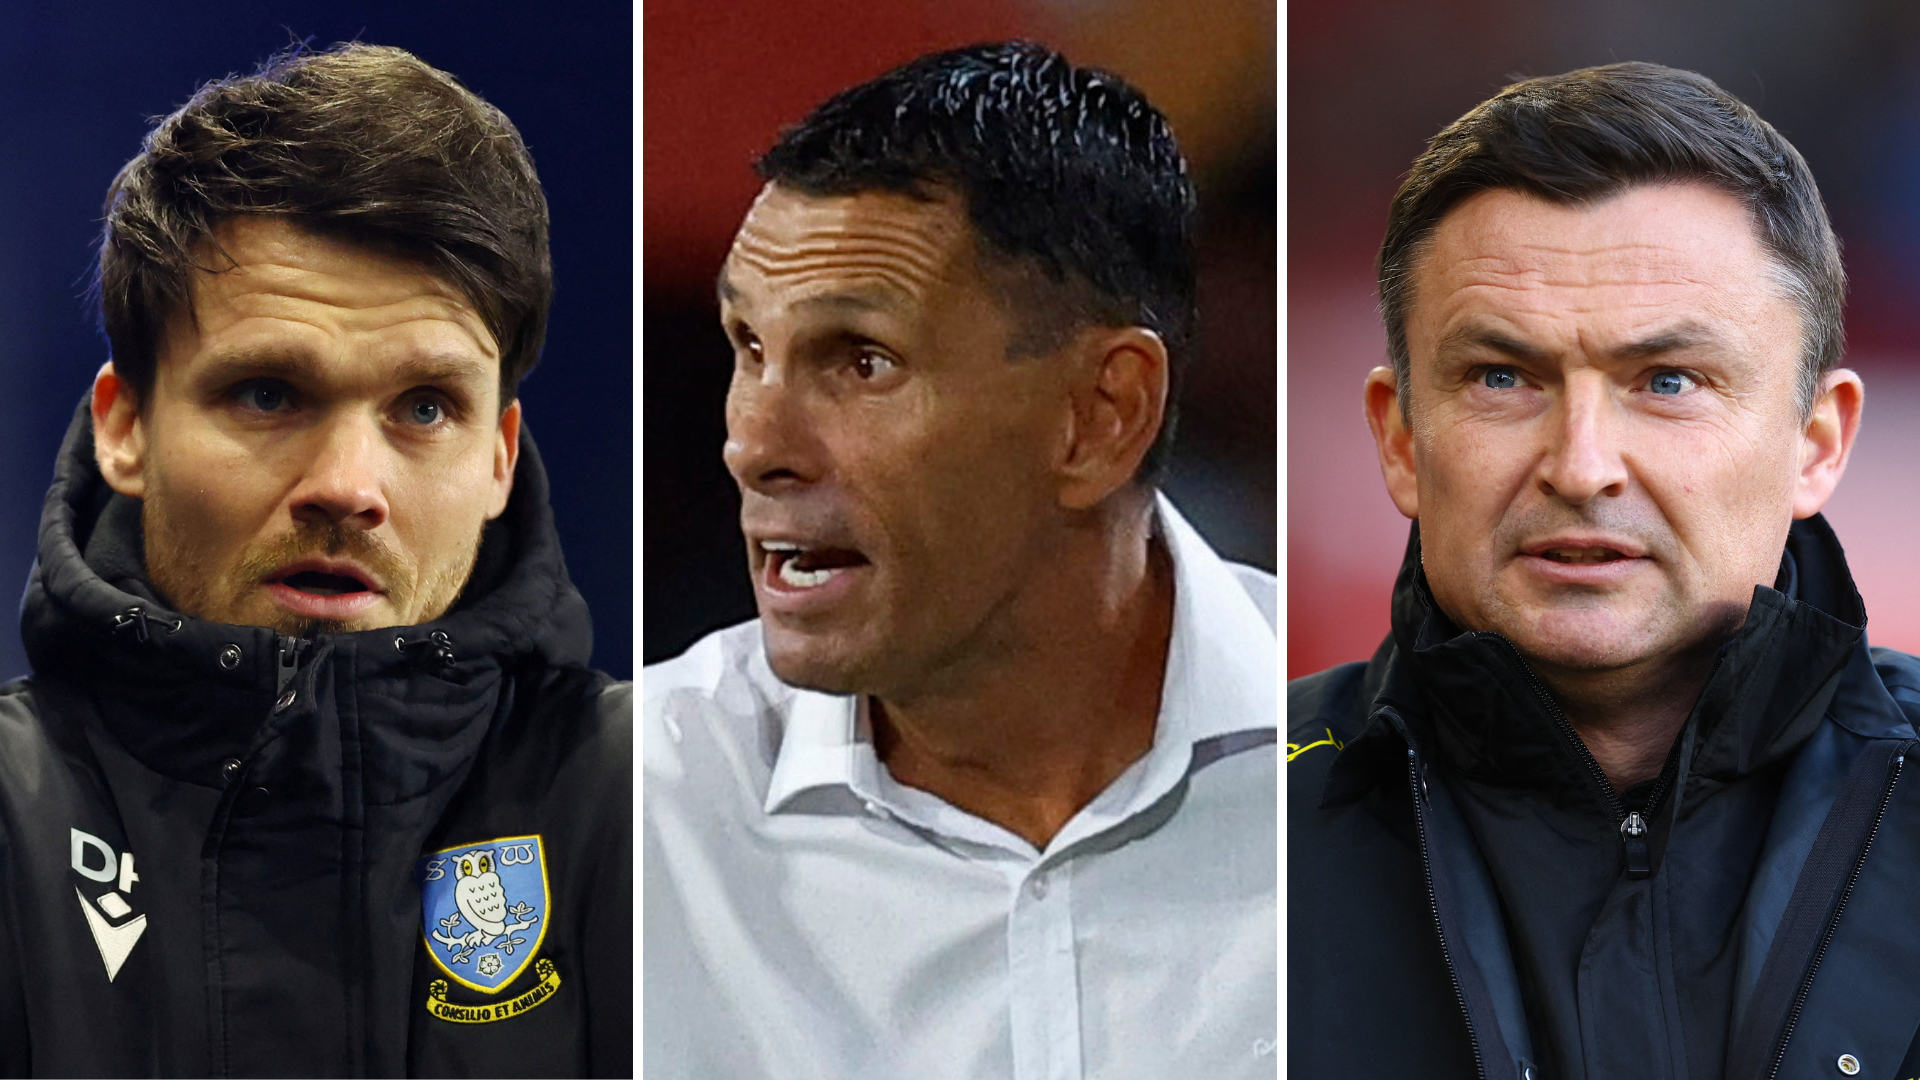 Danny Rohl, Gus Poyet and Paul Heckingbottom (Combined image)